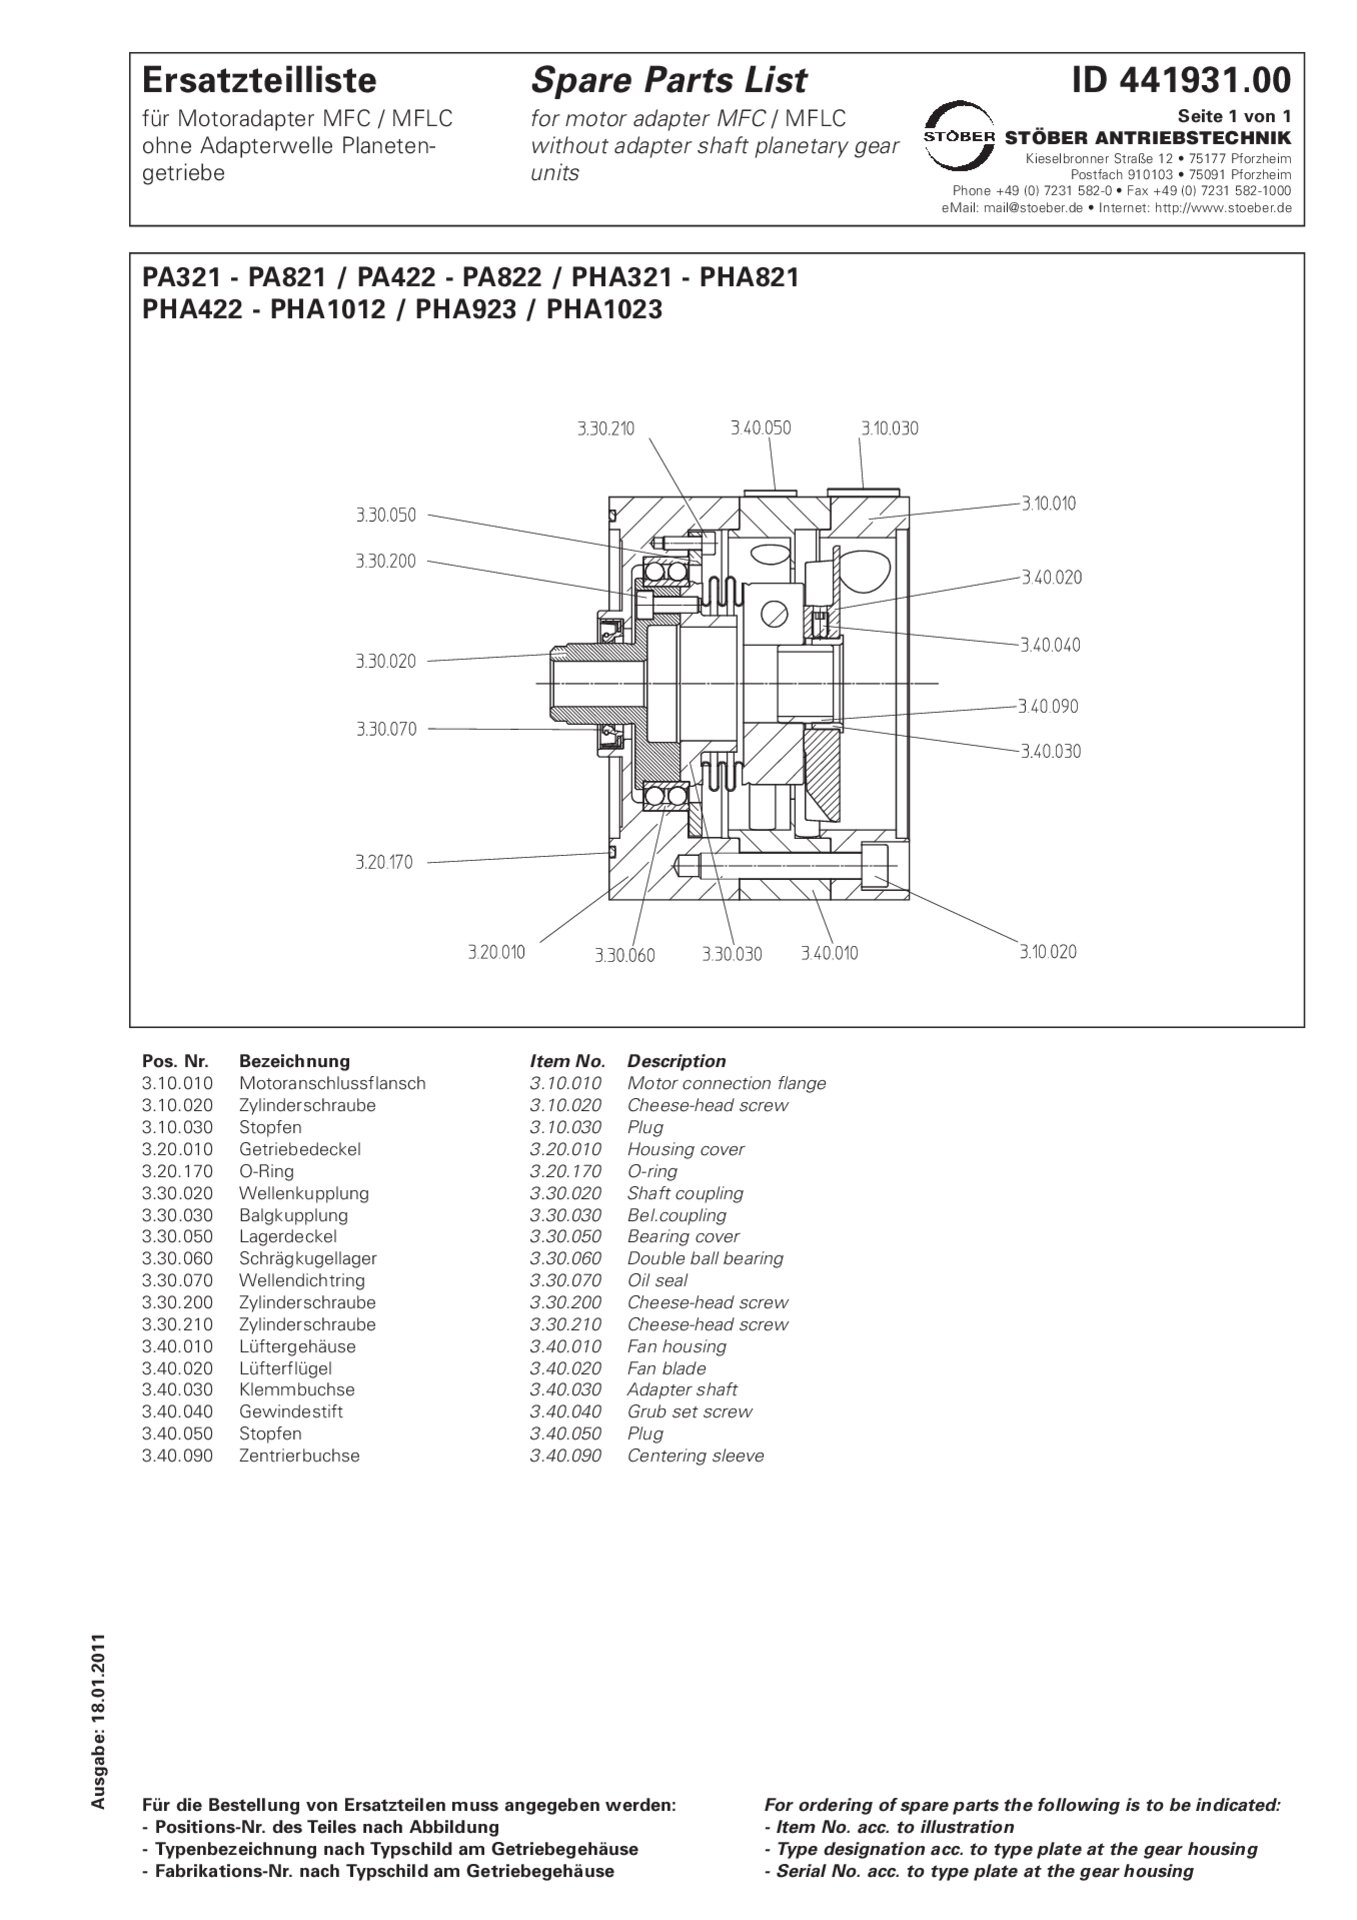 Spare parts list MFC / MFLC without adapter shaft PA / PHA